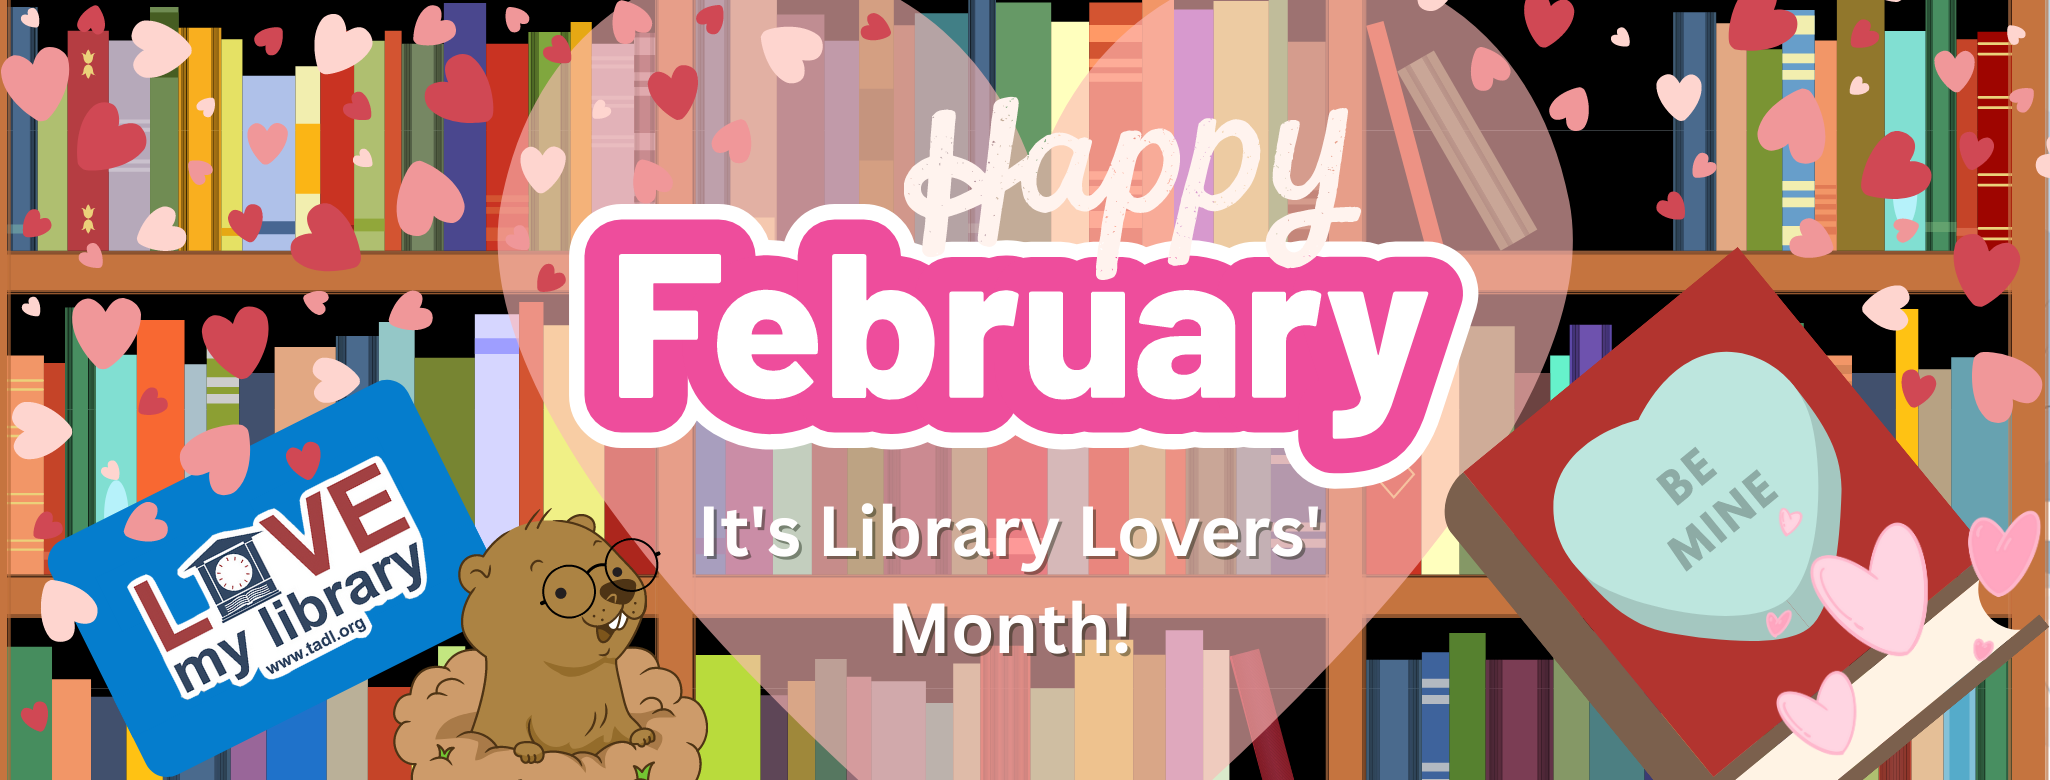 Bookshelves with hearts and a library card - Happy February, it's Library Lovers' Month!